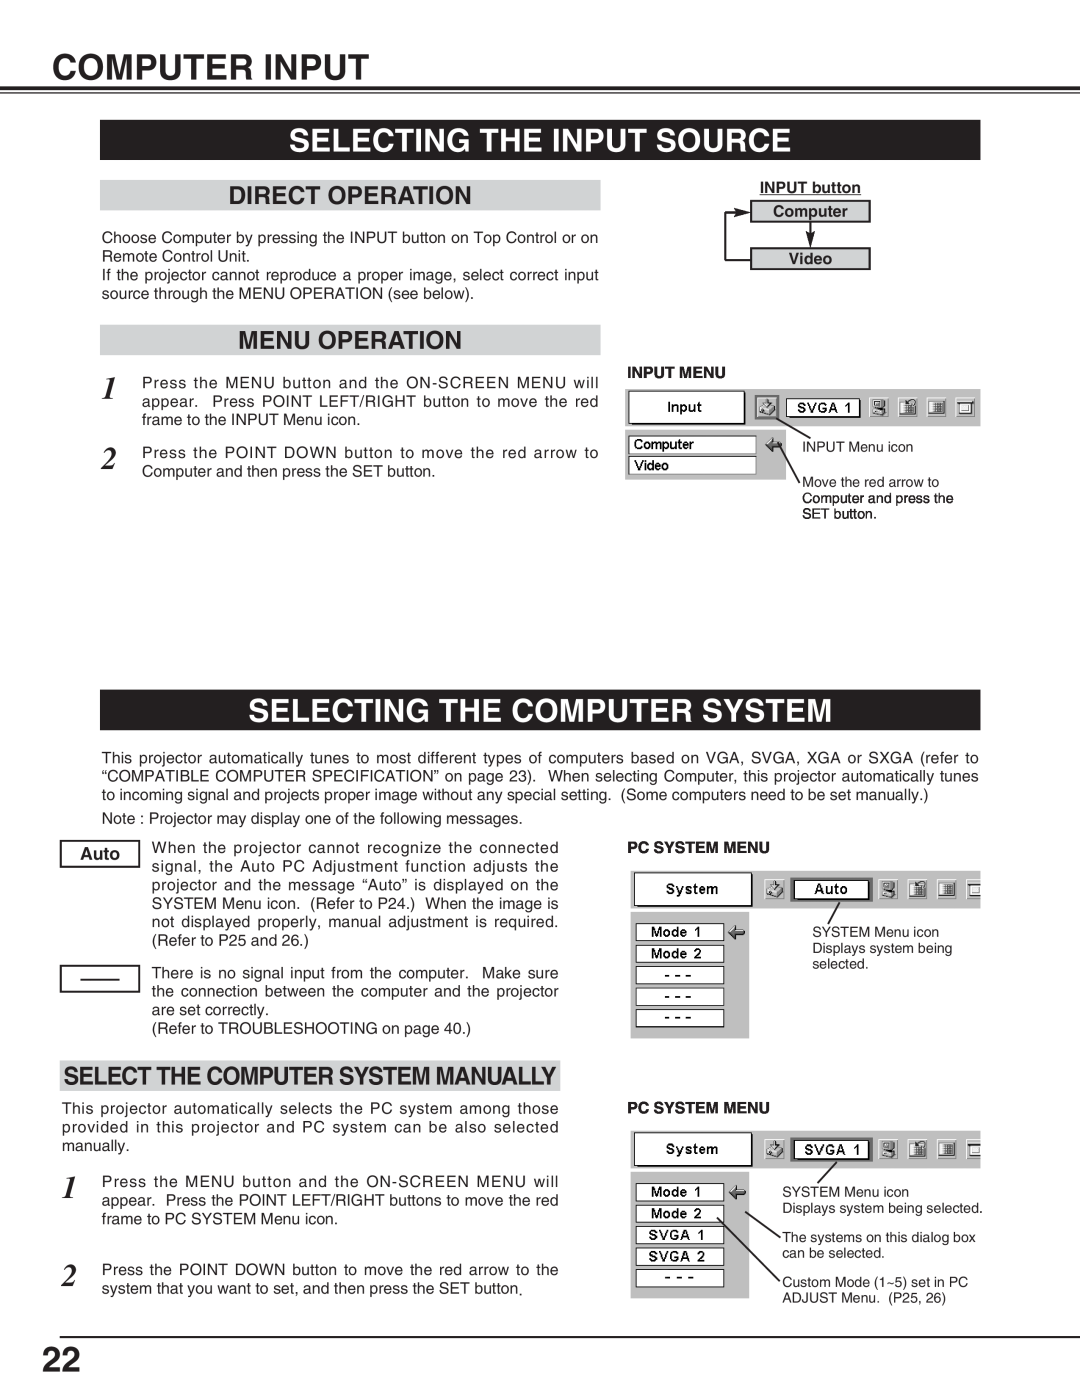 Canon LV-X2 Computer Input, Selecting The Input Source, Selecting The Computer System, Direct Operation, Menu Operation 